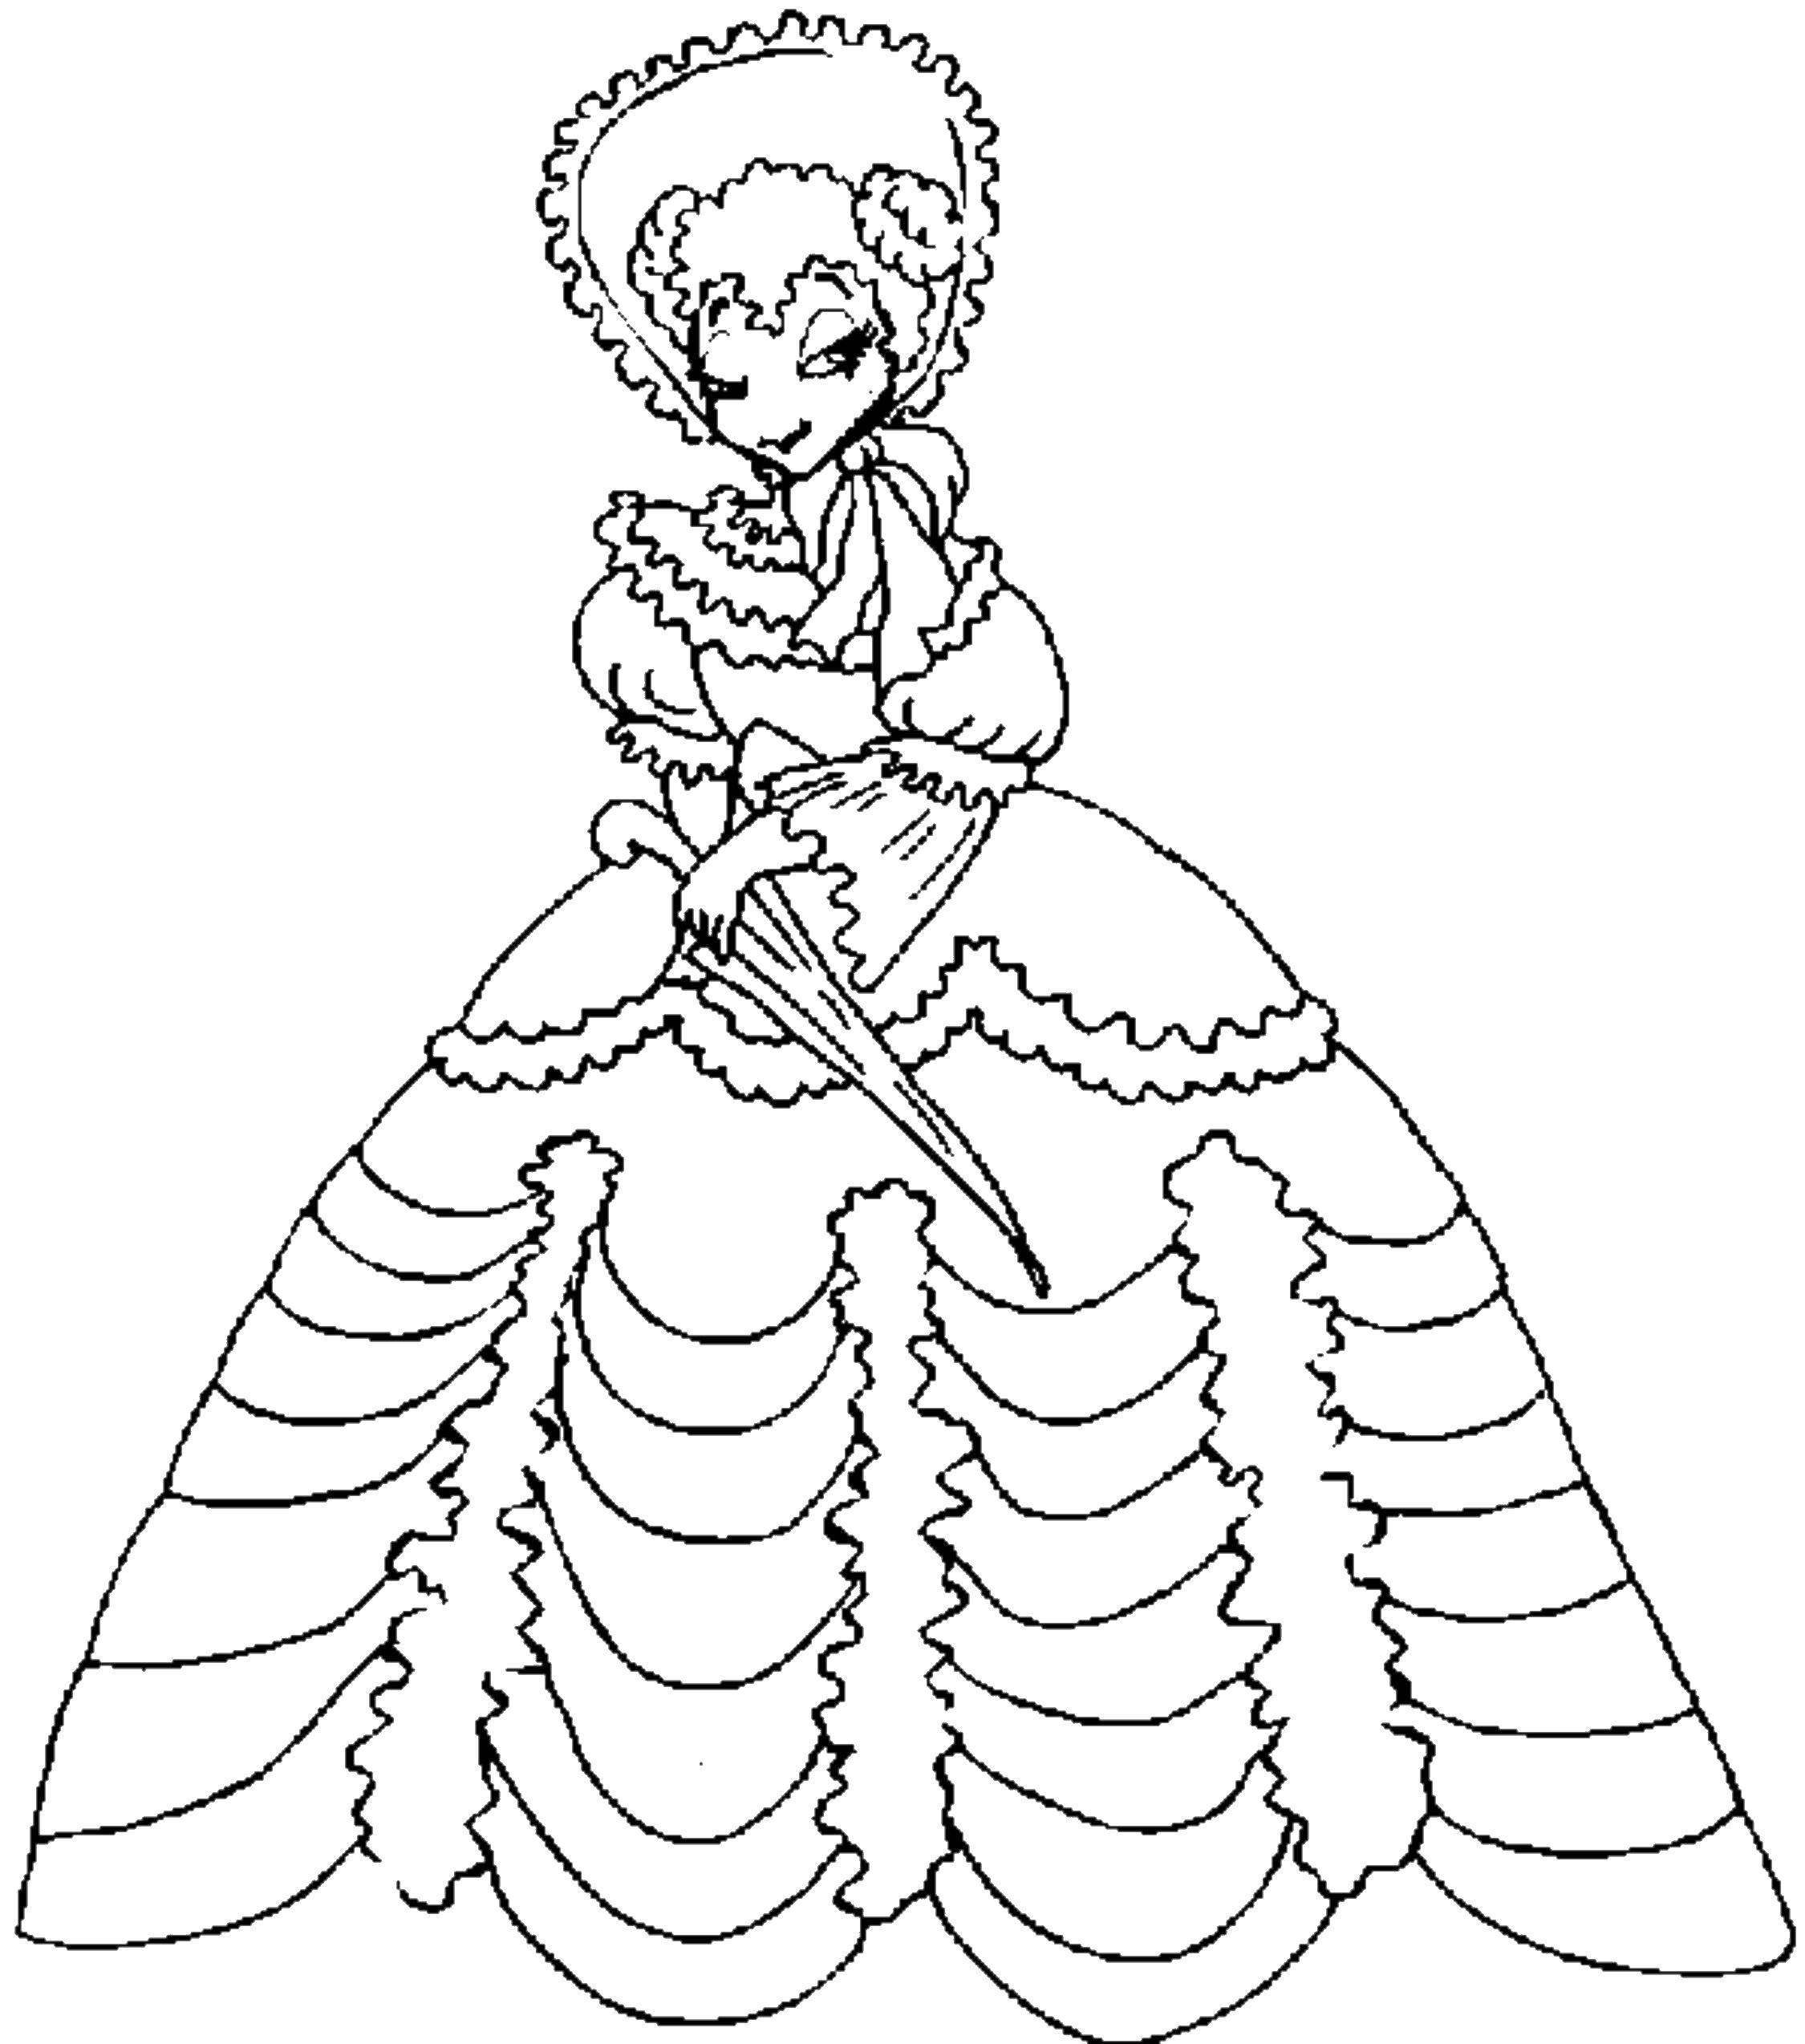 Coloring Girl in dress with umbrella. Category girl. Tags:  girl dress.